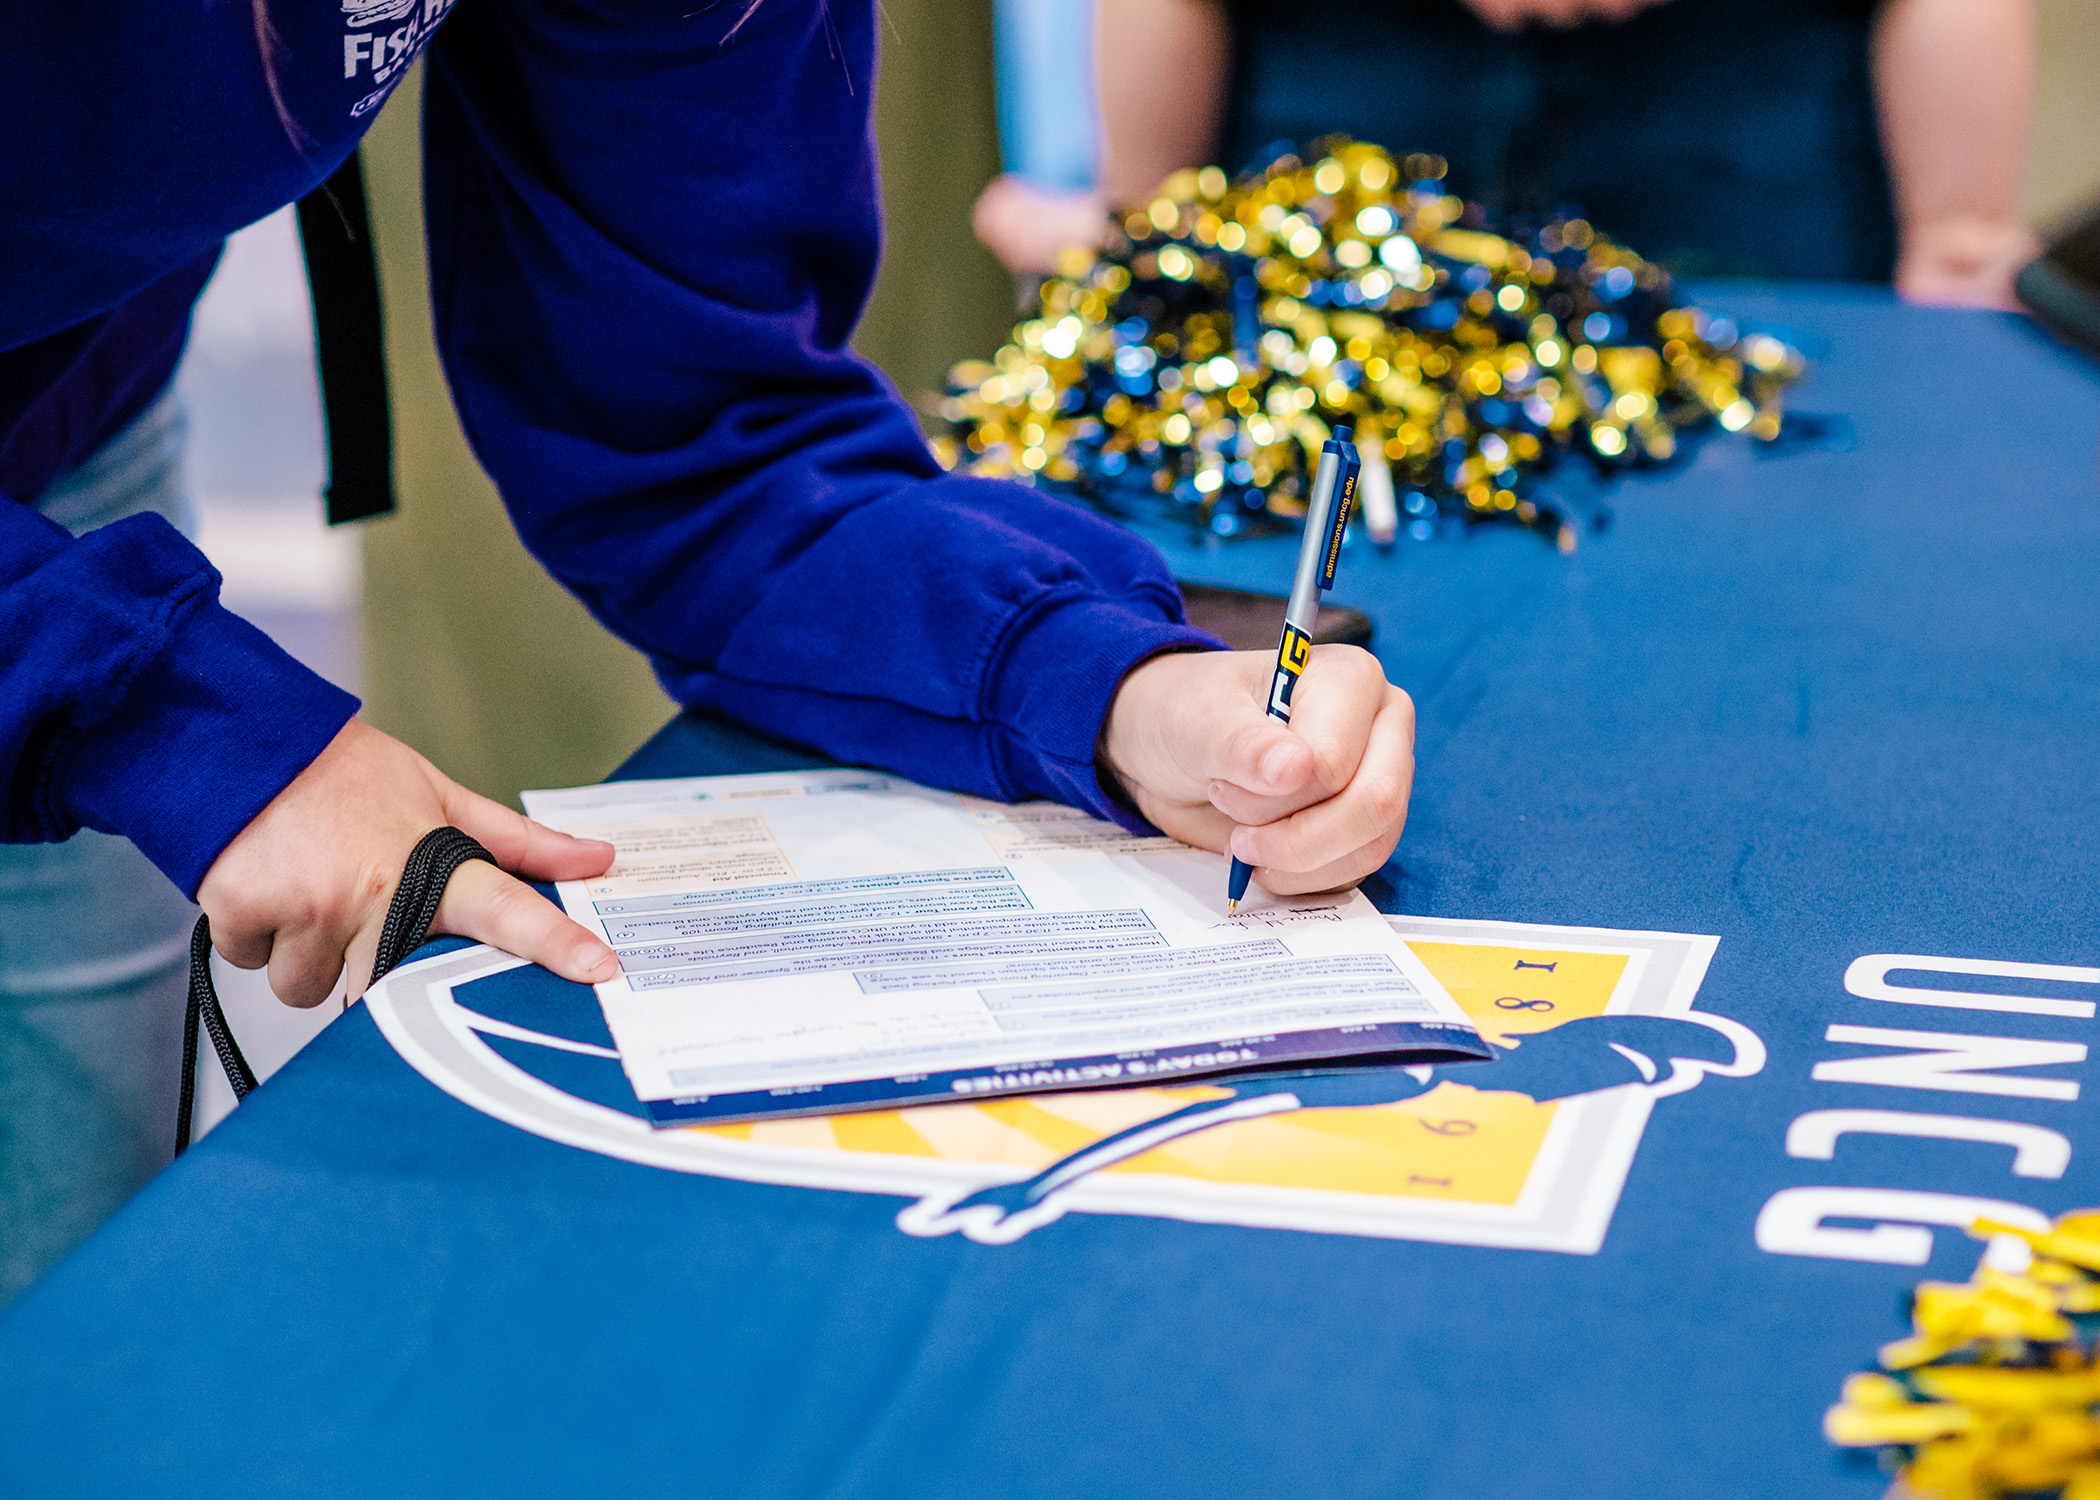 Closeup of student signing a form on a UNCG branded table.